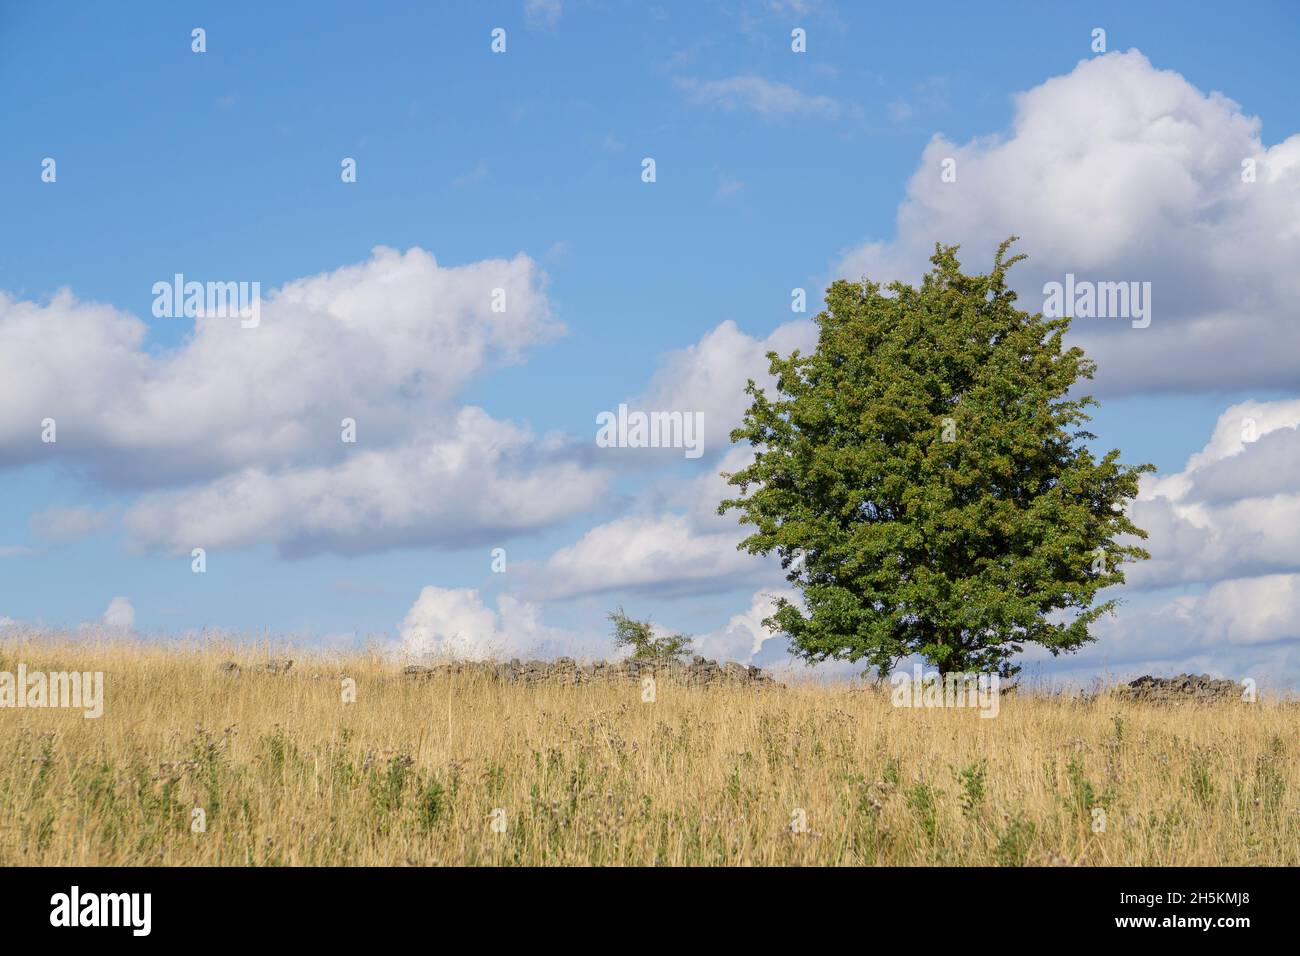 Isolated tree outdoors in UK countryside in summer sunshine with blue sky and fluffy clouds. Stock Photo